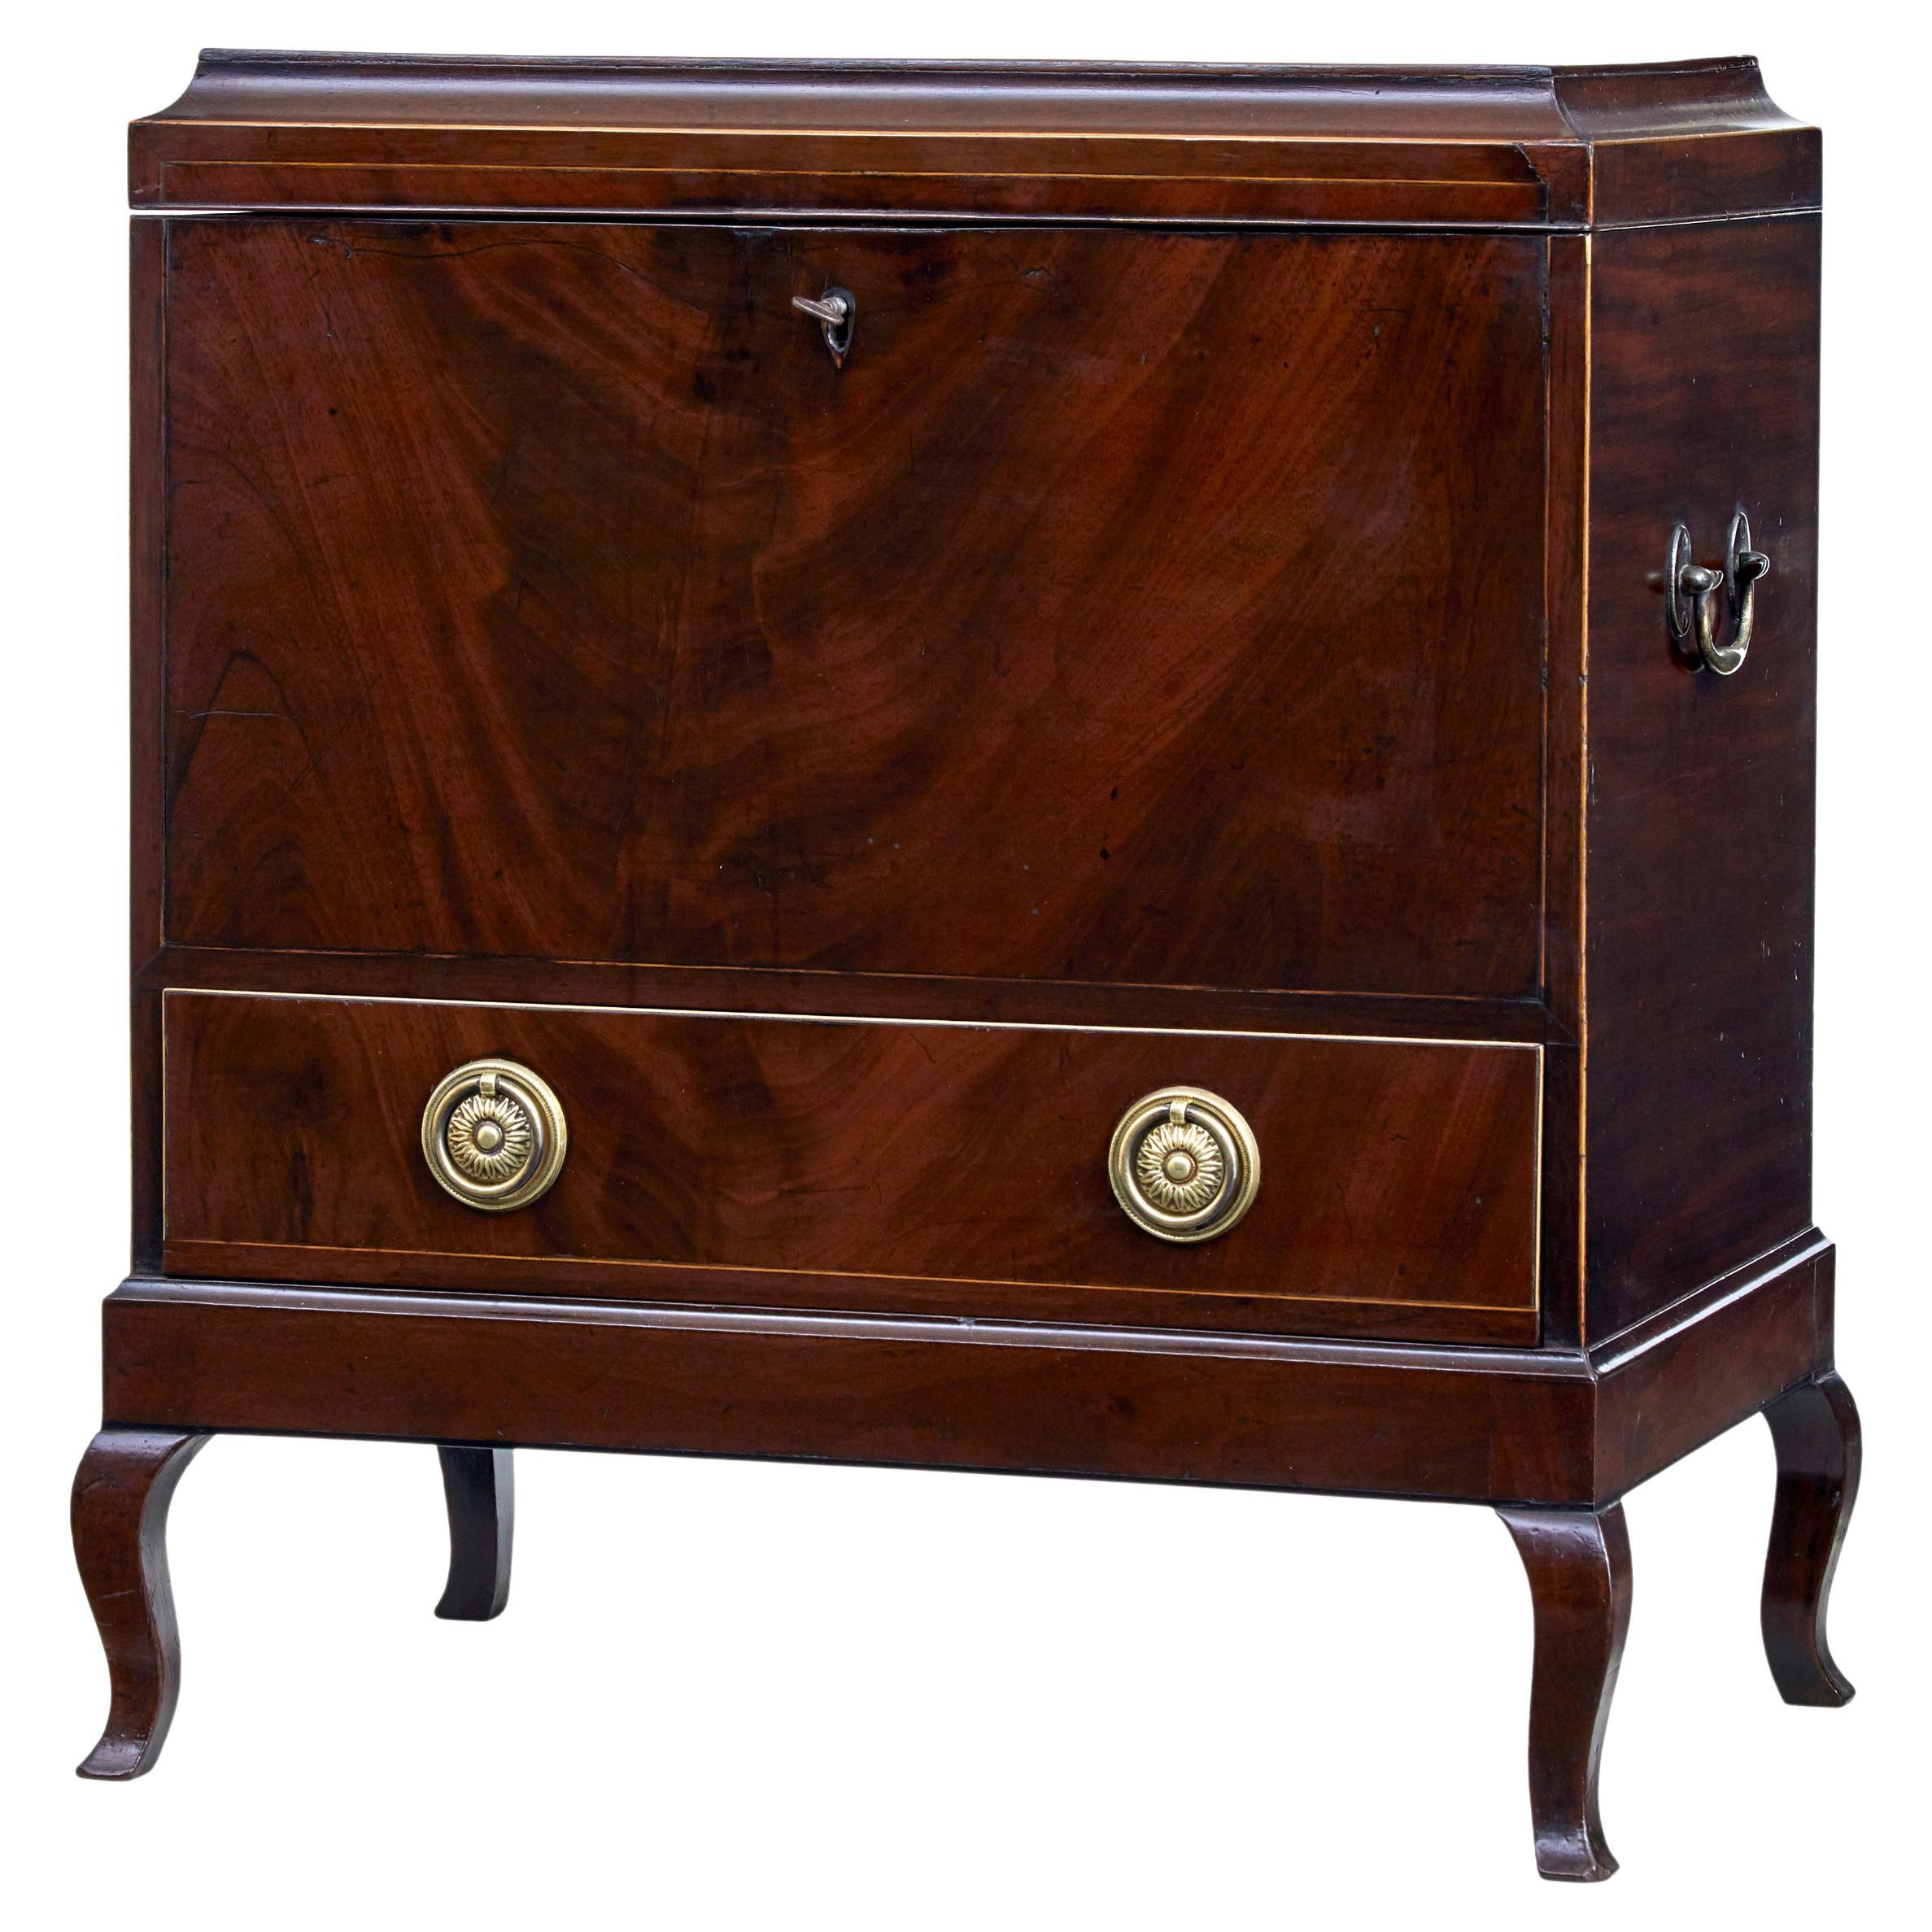 Early 20th century Edwardian mahogany inlaid wine cooler For Sale